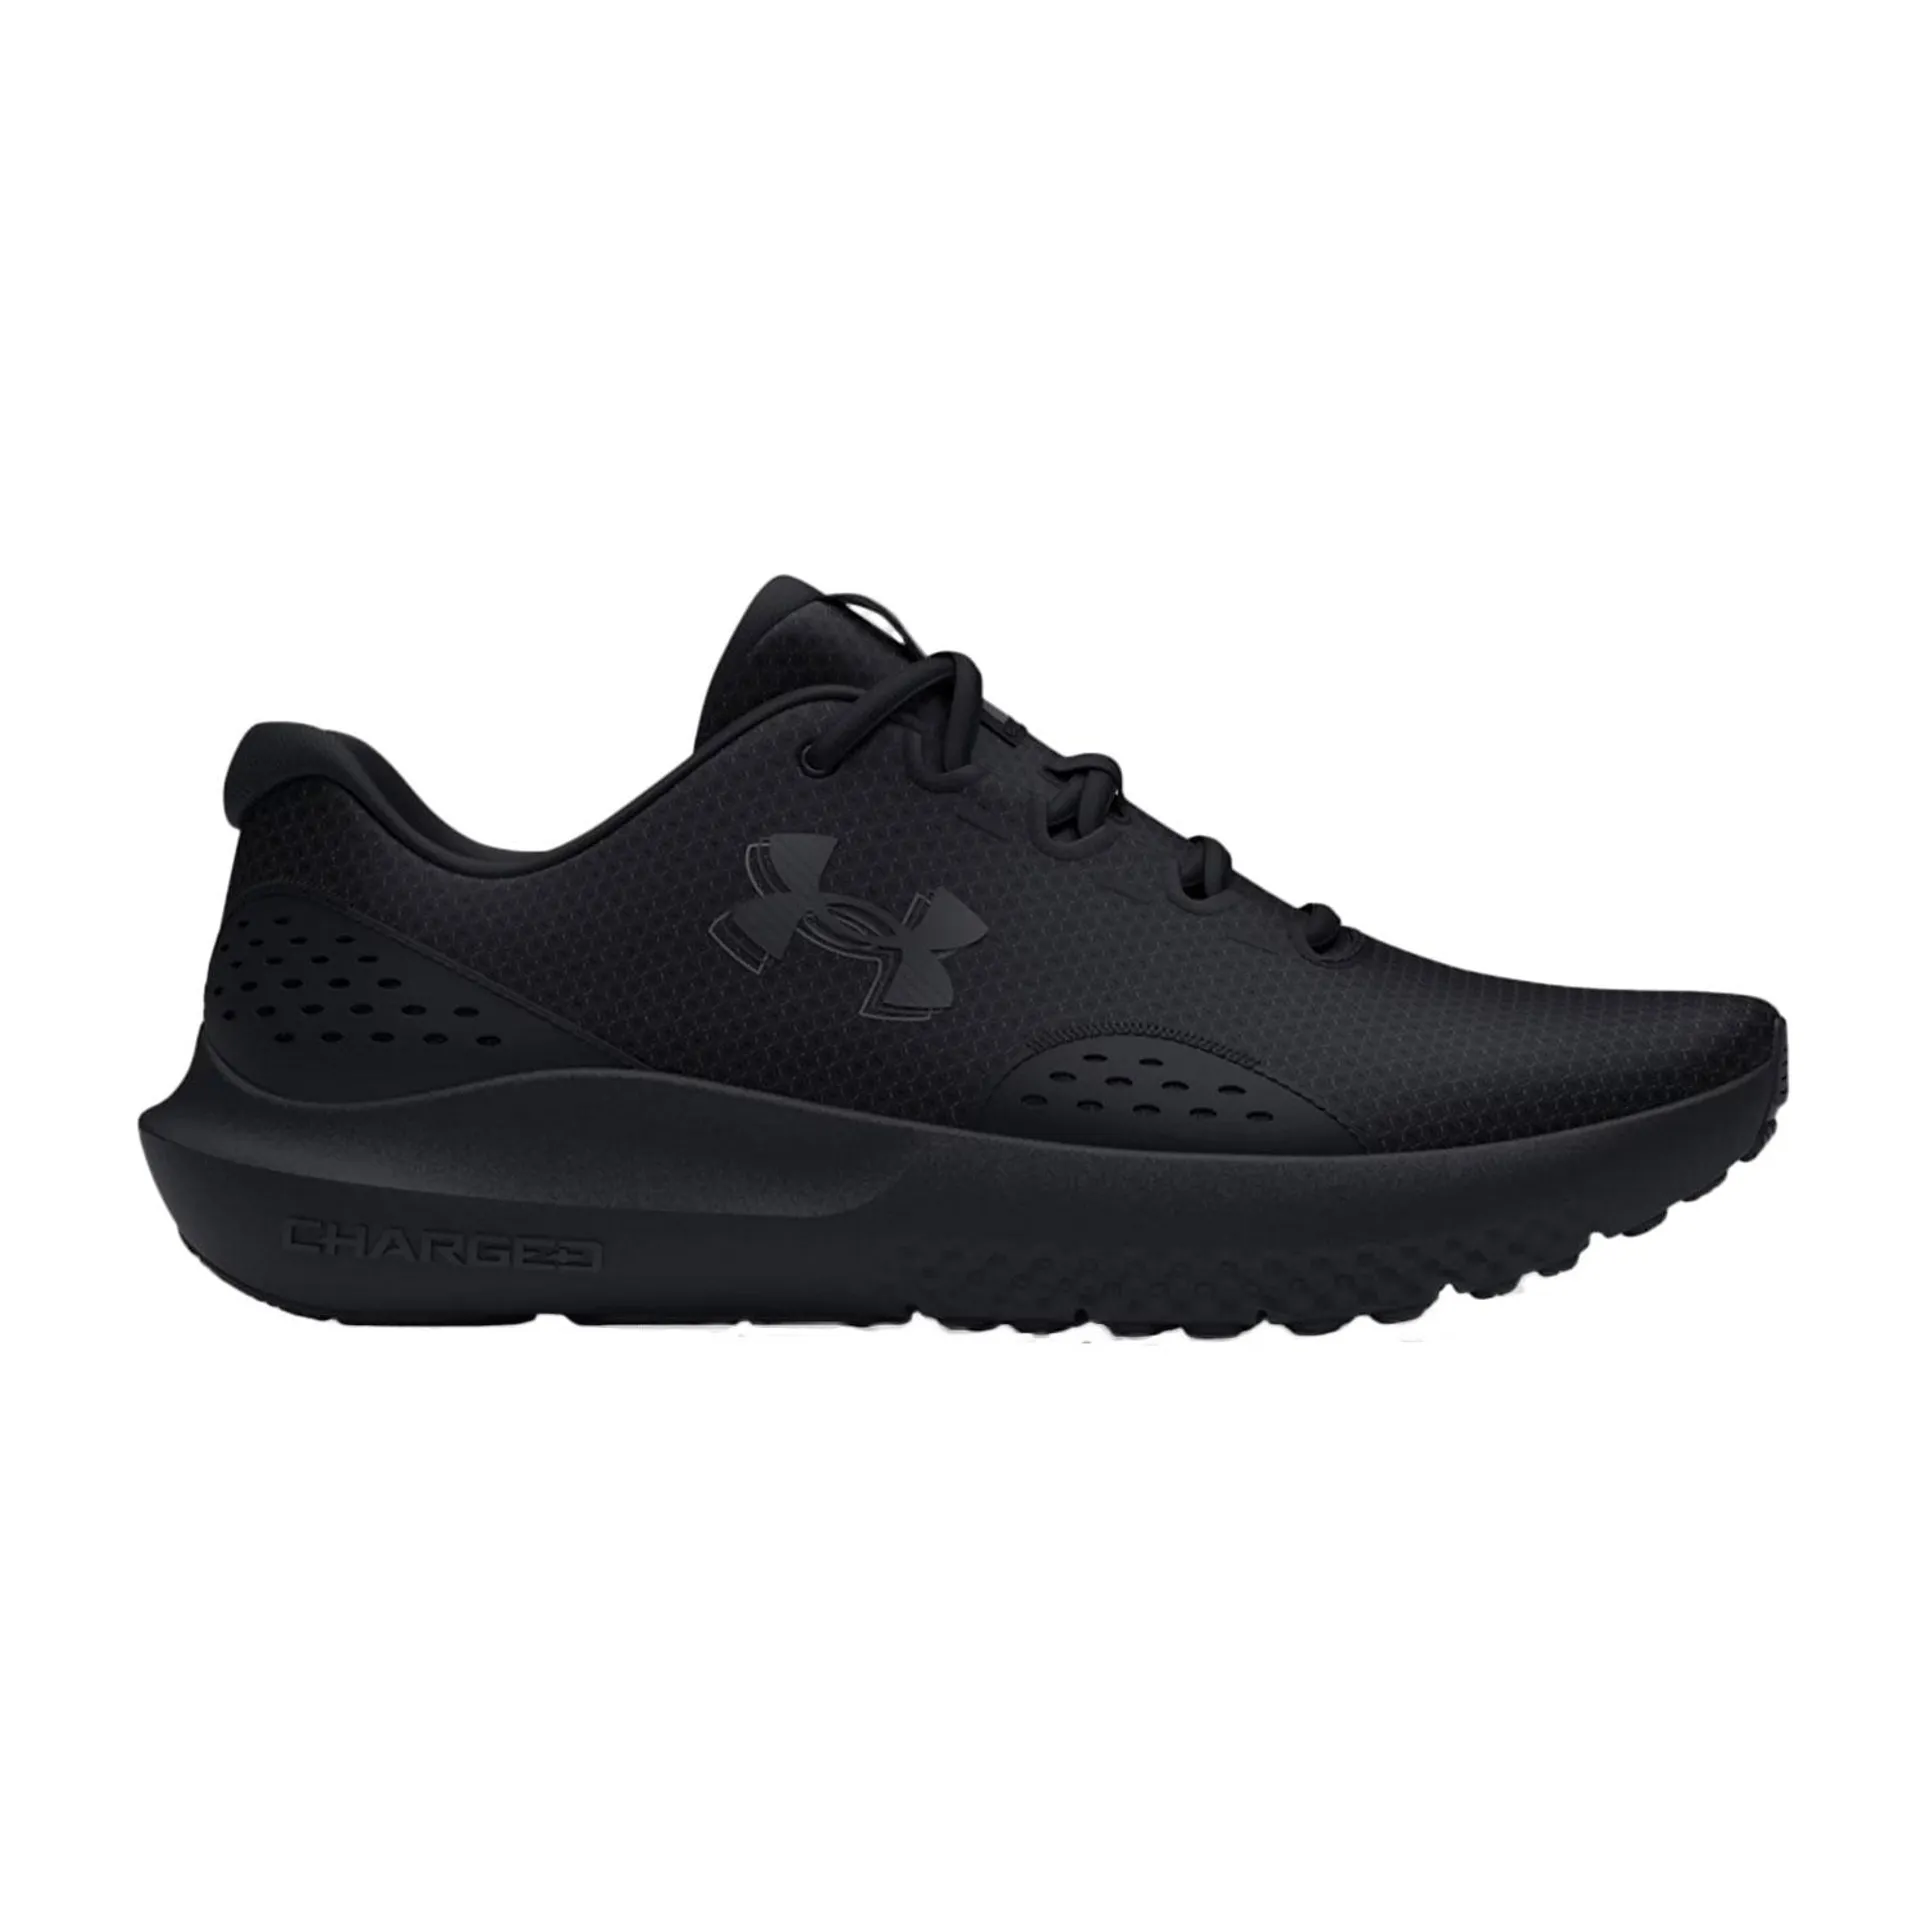 Under Armour Surge 4 Men's Running Shoes